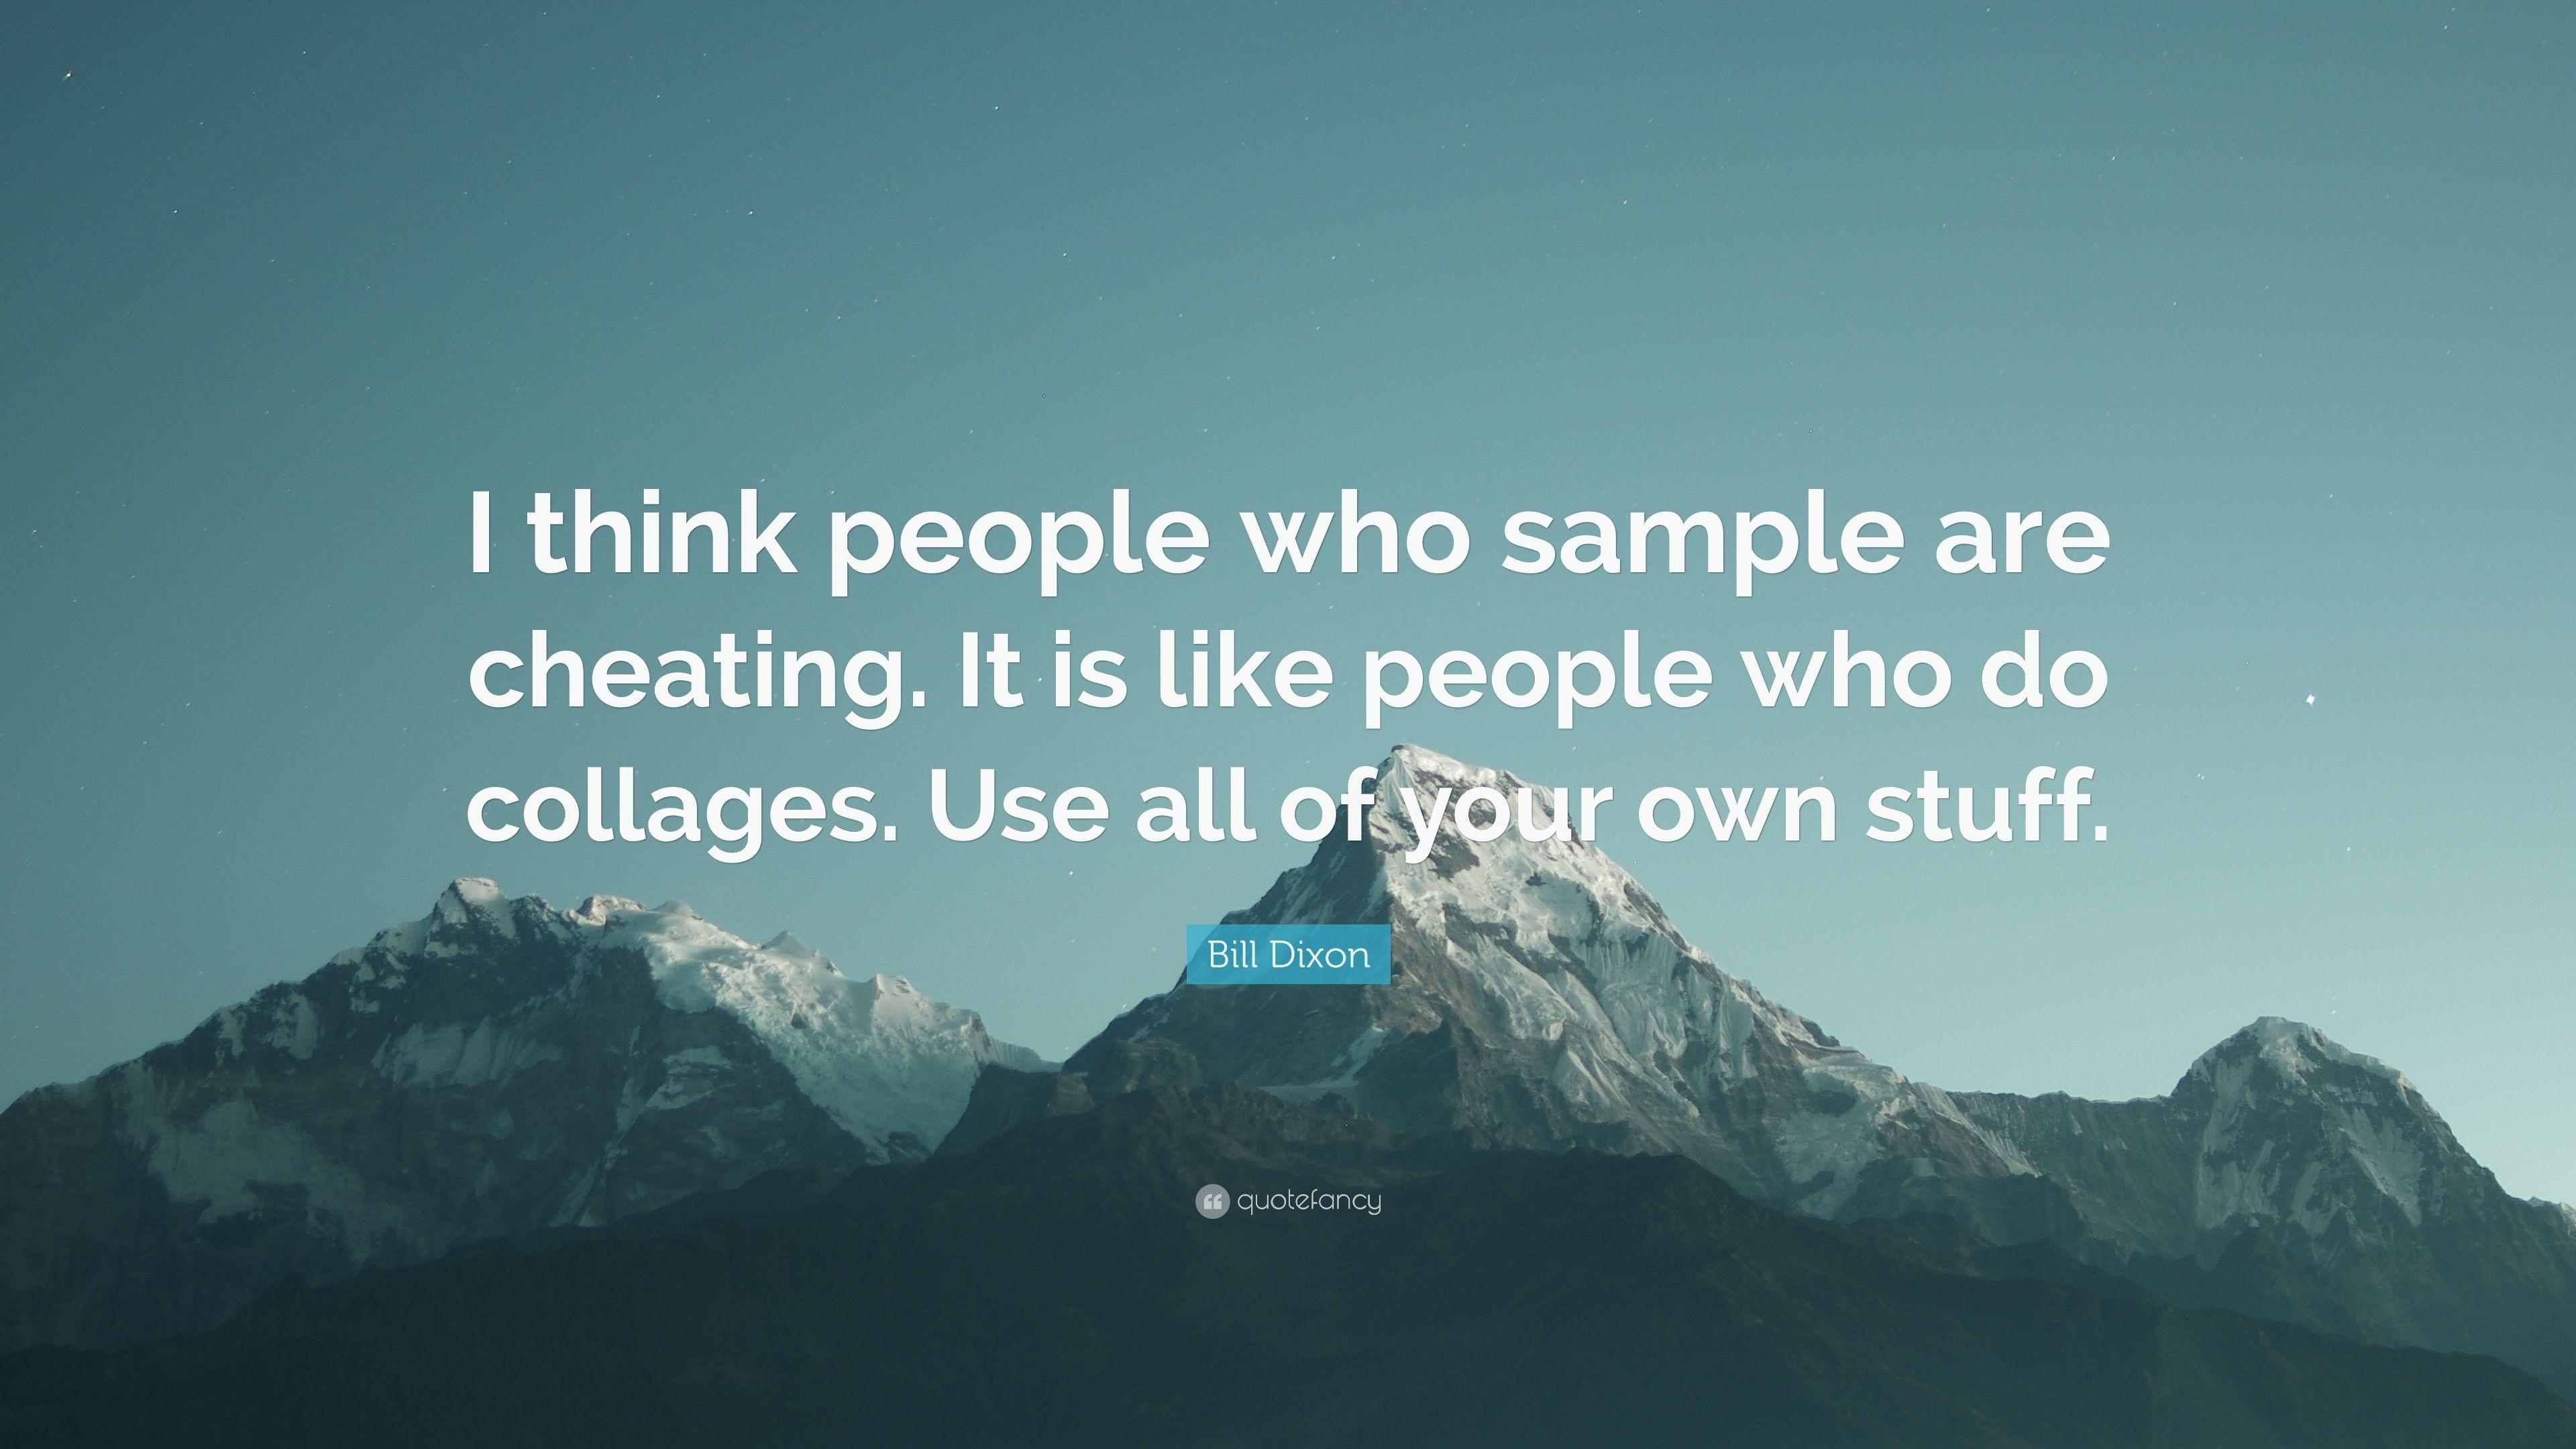 Bill Dixon Quote: “I think people who sample are cheating. It is